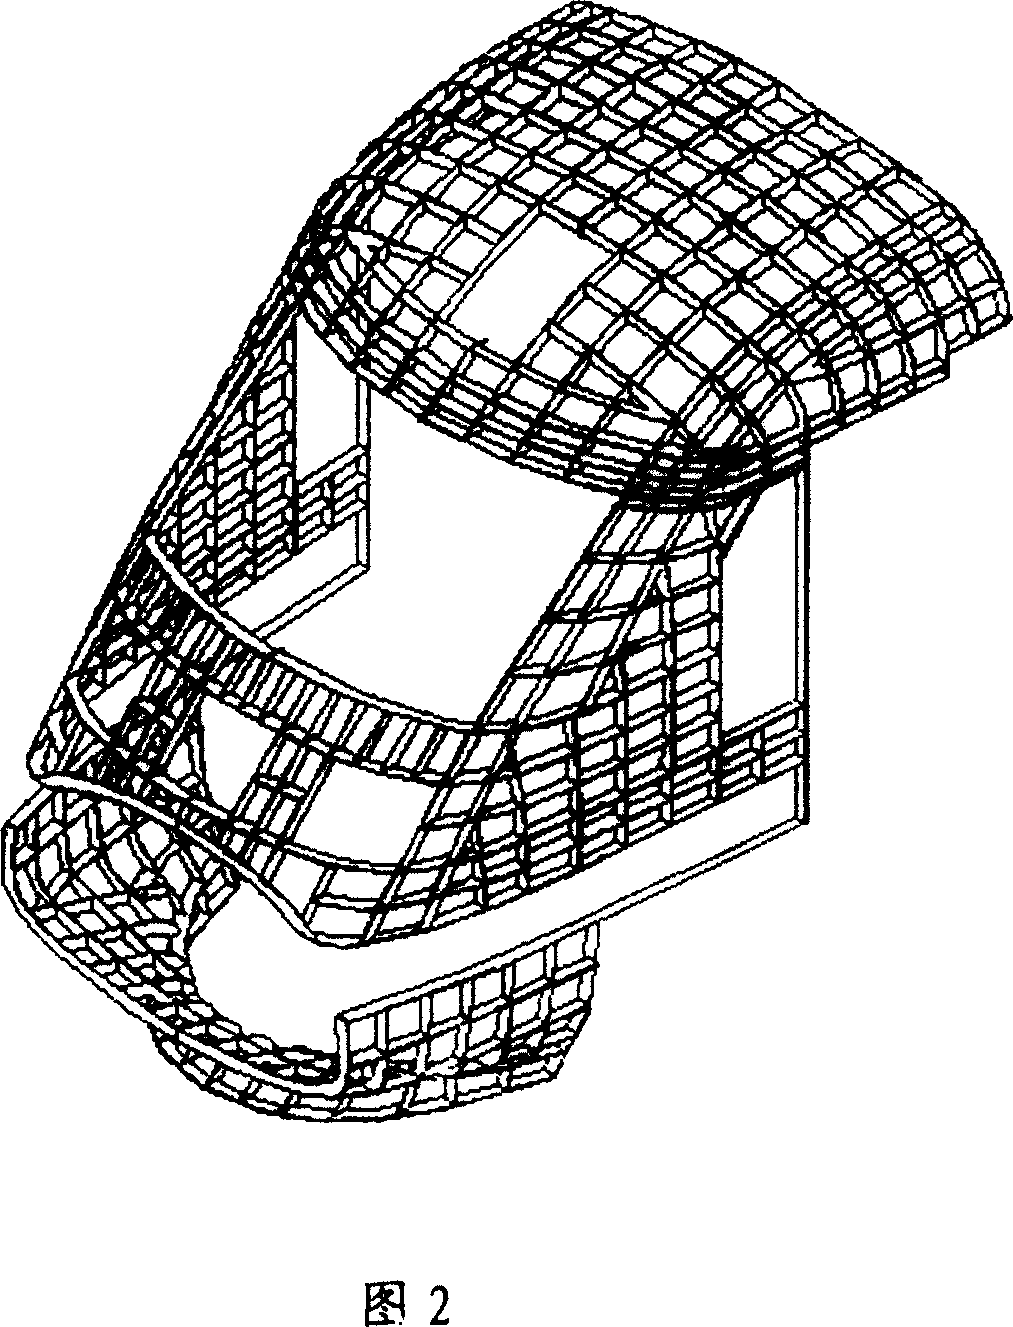 Design and process method for profile and structure of streamline locomotive